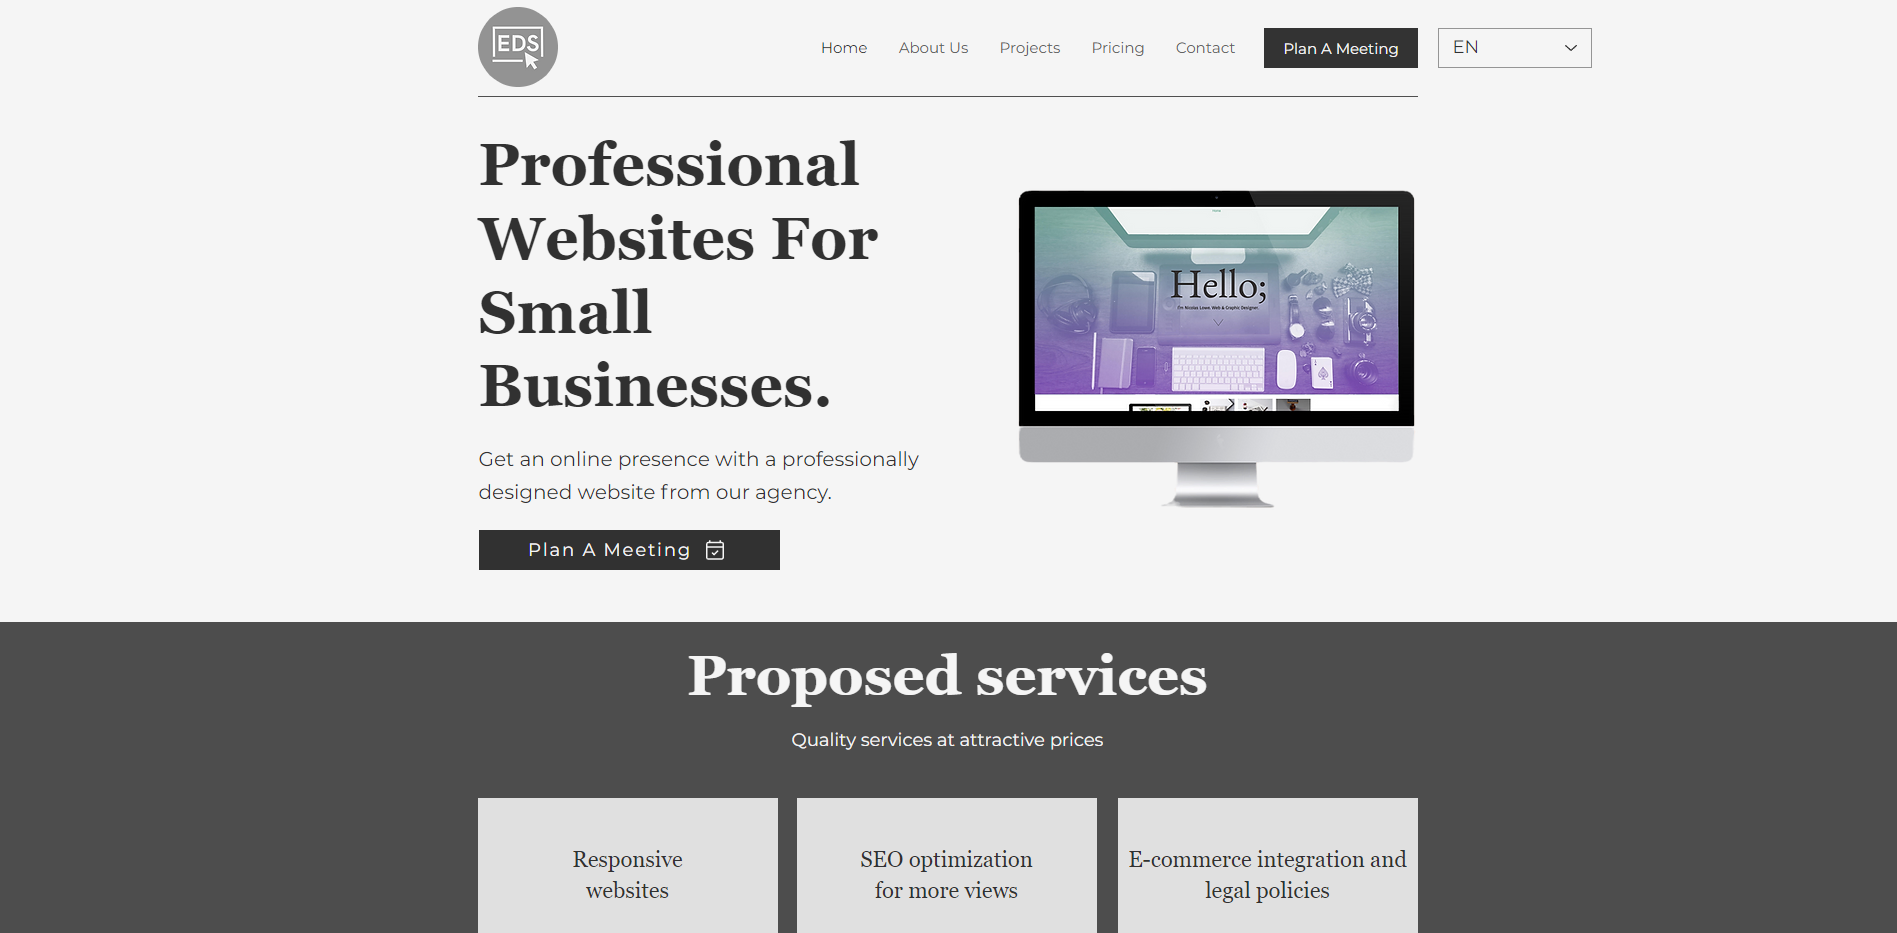 EDS Web Design, website creation on wix for your business